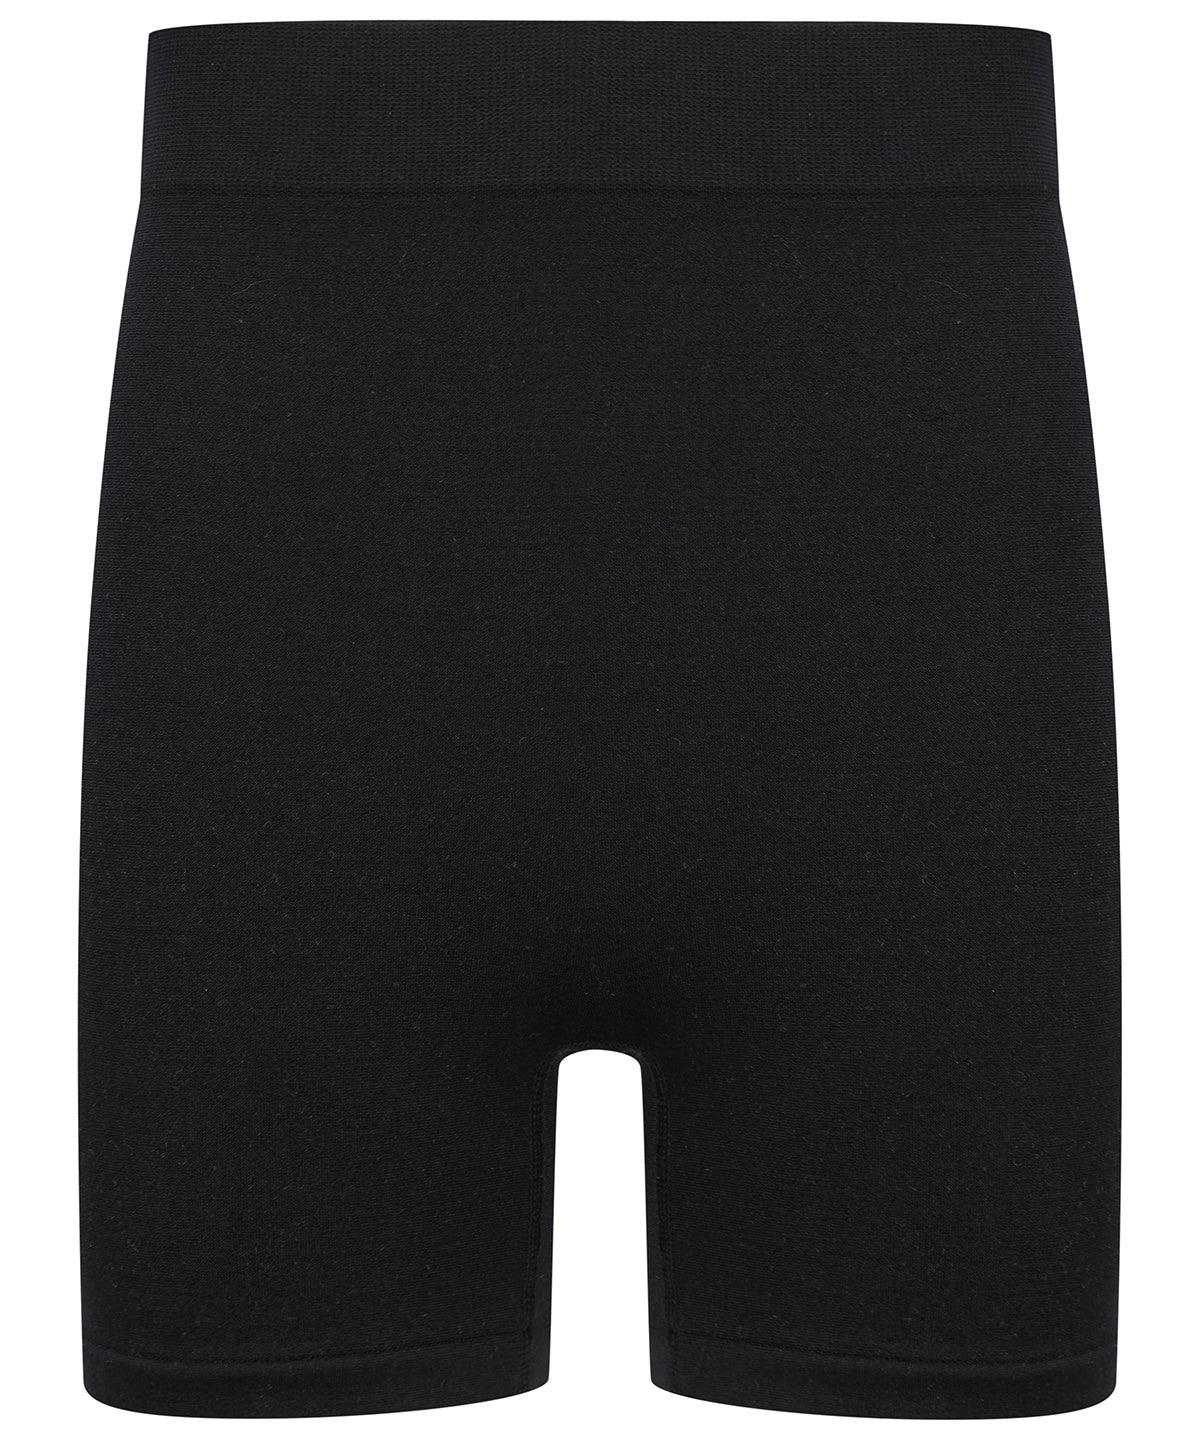 Black - Kids seamless shorts Shorts Tombo Activewear & Performance, Back to the Gym, Junior, New Styles For 2022, On-Trend Activewear, Trousers & Shorts Schoolwear Centres